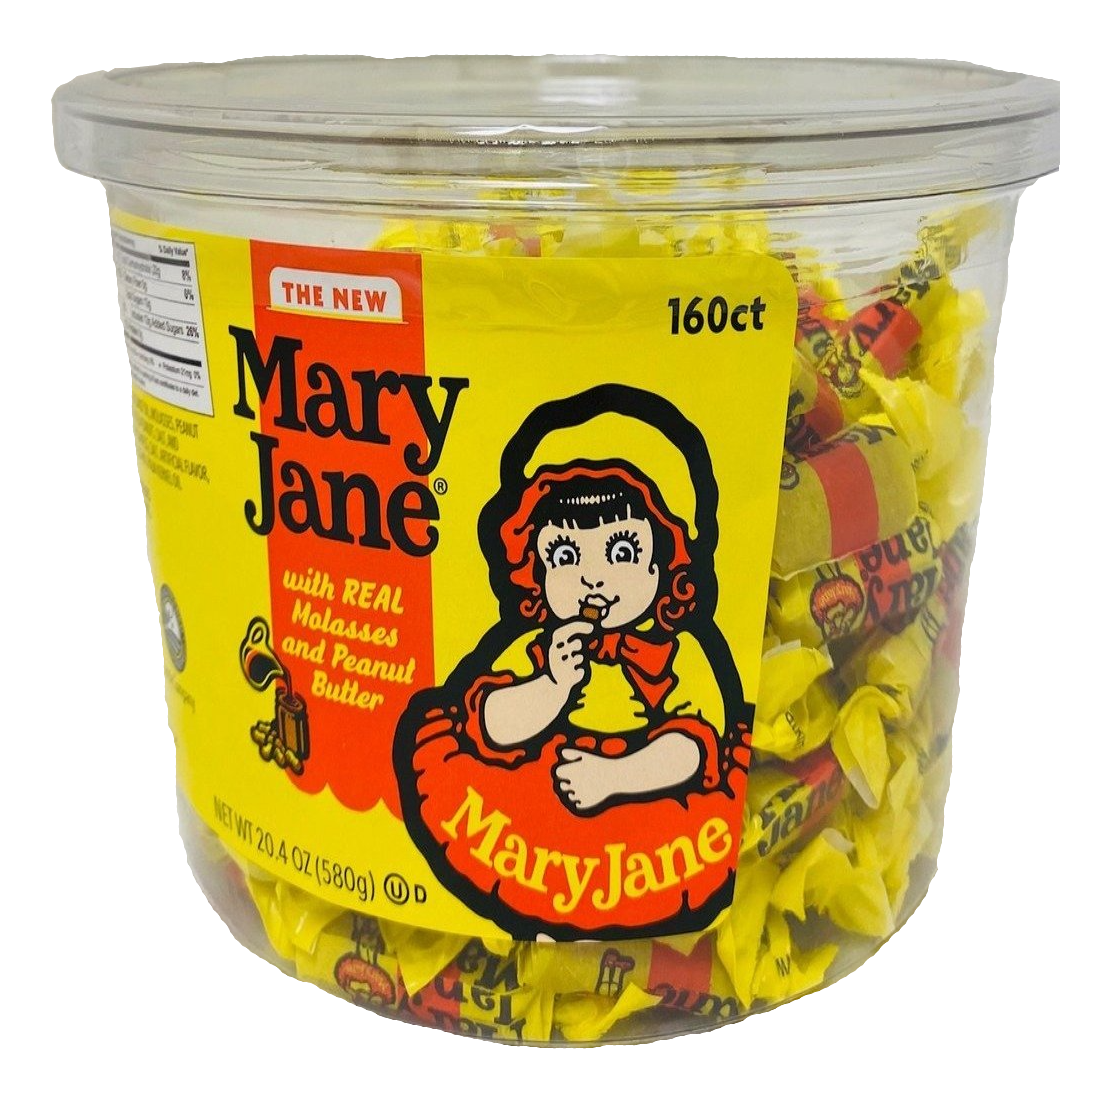 All City Candy Mary Jane 160 Count Tub 20.4 oz Taffy Atkinson's Candy For fresh candy and great service, visit www.allcitycandy.com